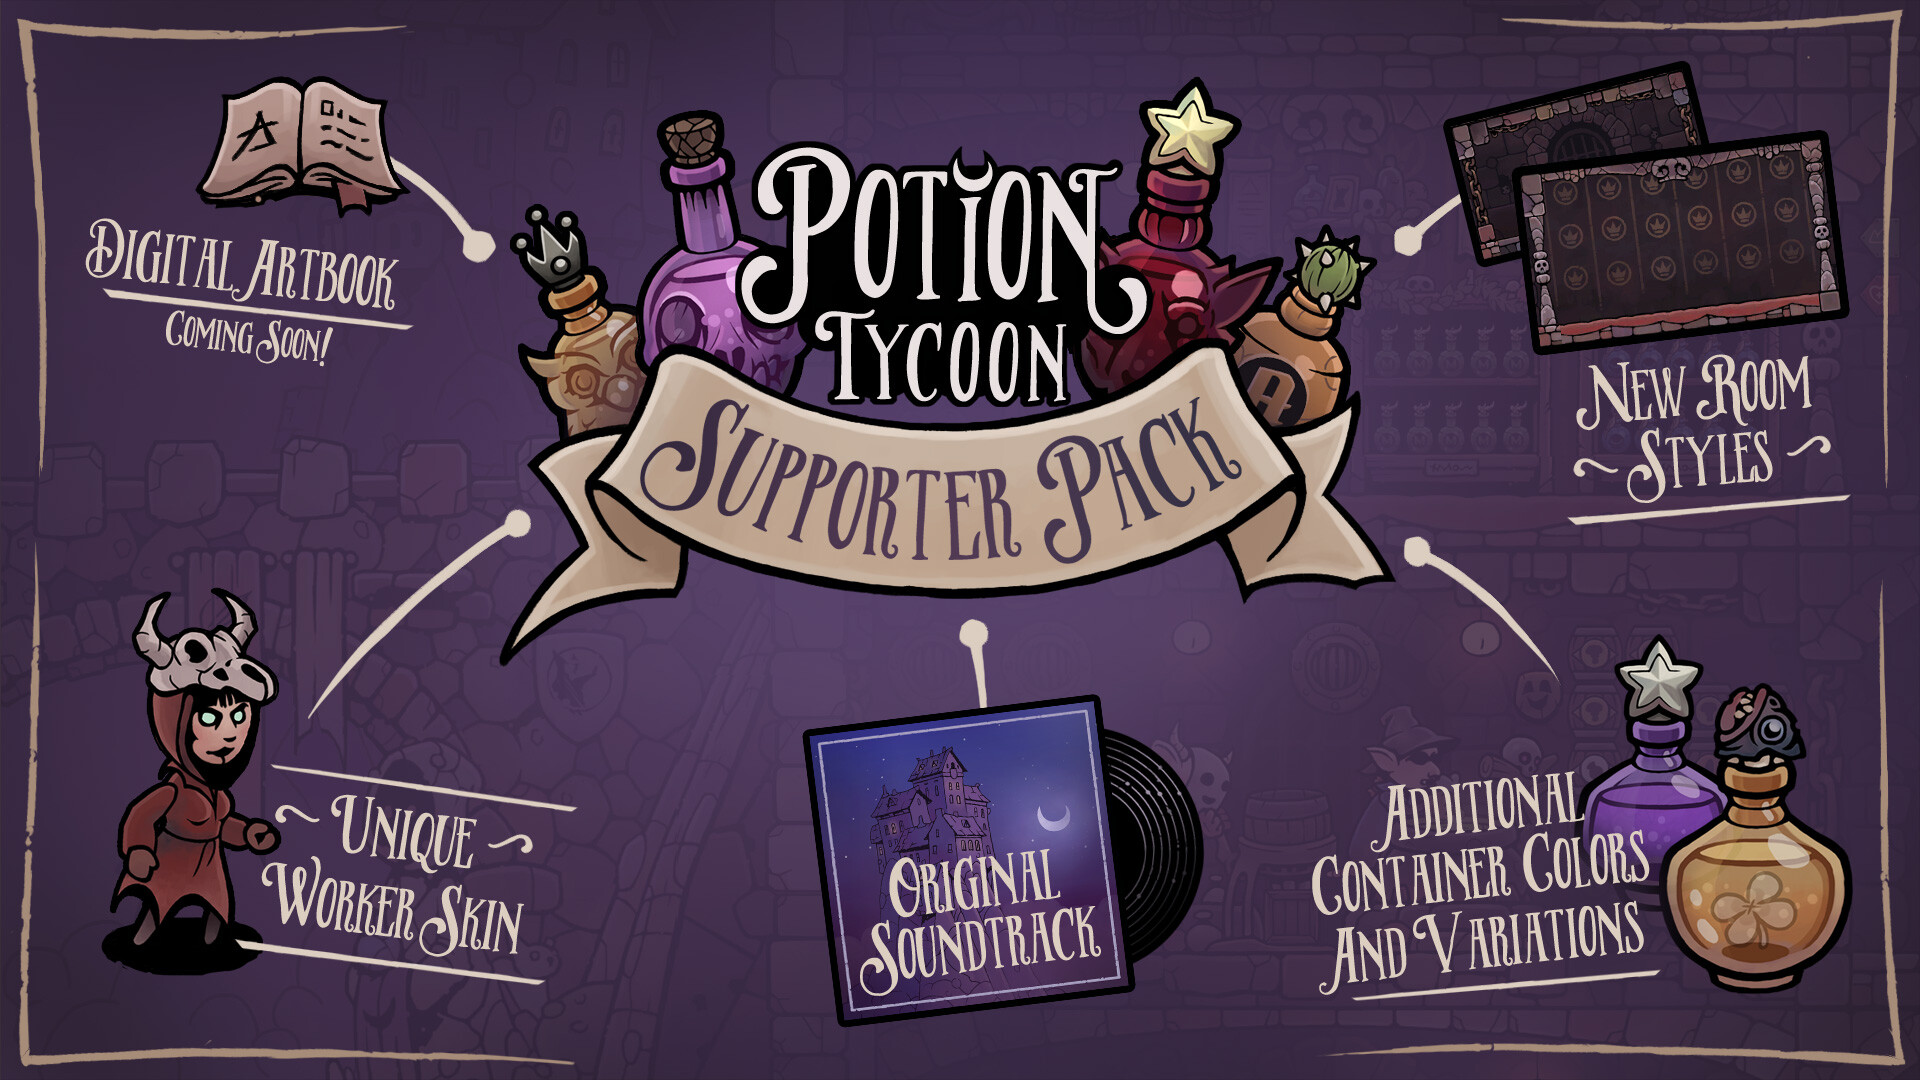 Potion Tycoon - Supporter Pack DLC Steam CD Key 7.88 usd